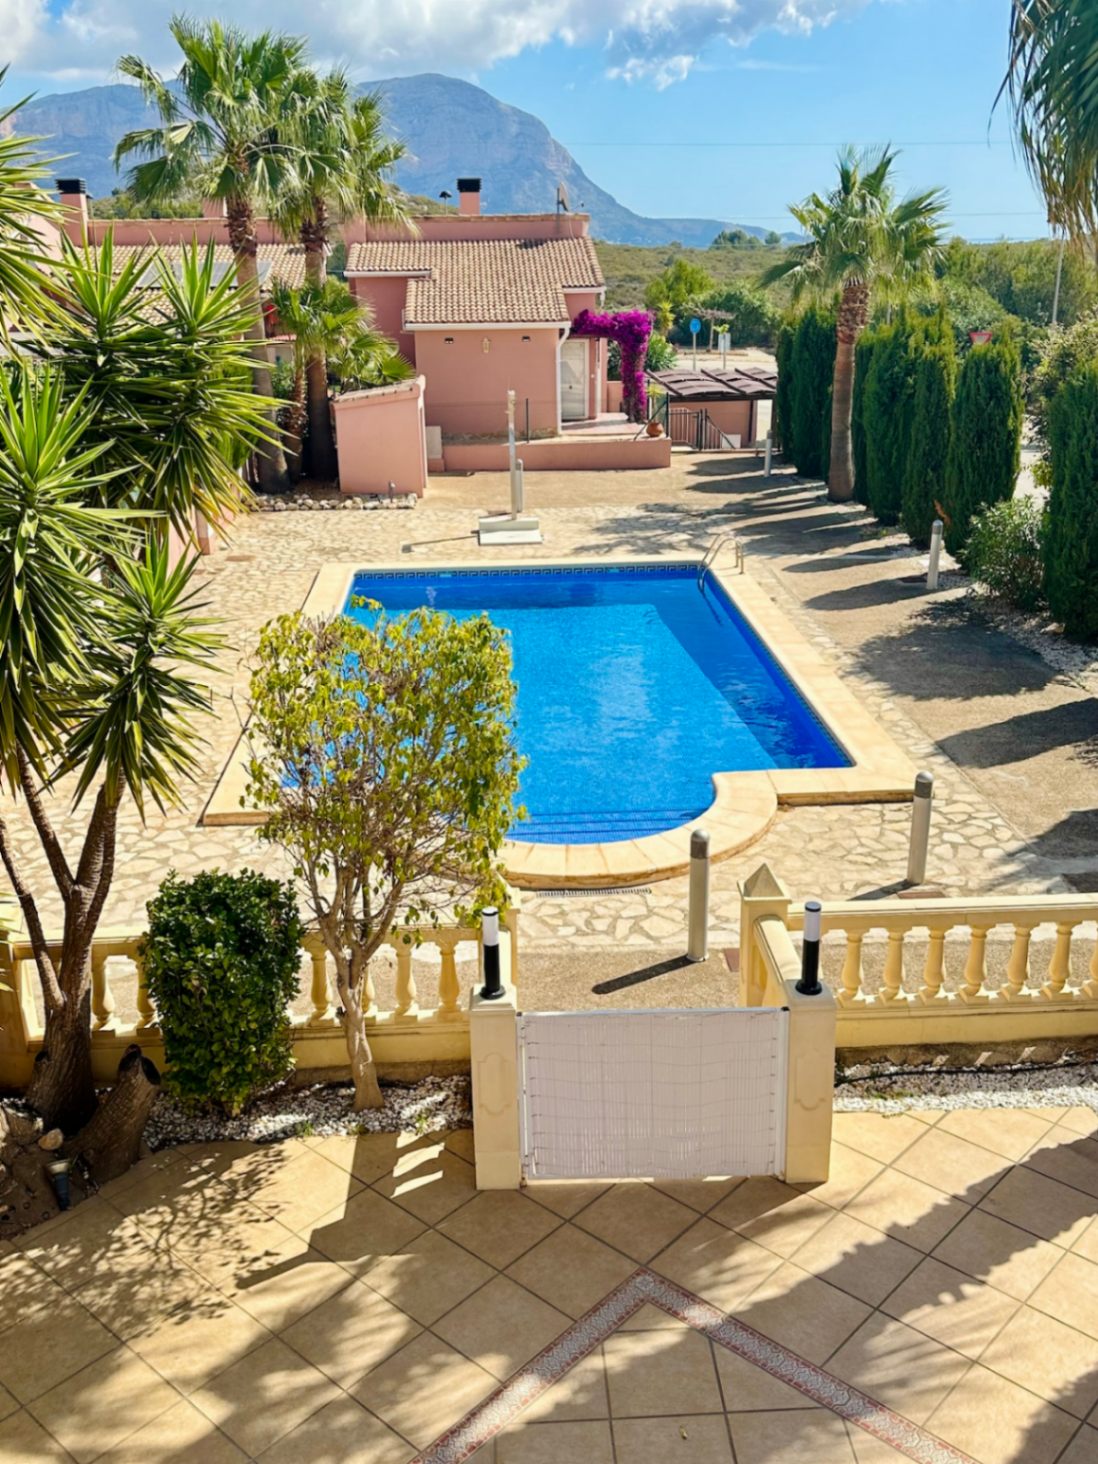 Detached house with direct access to the pool